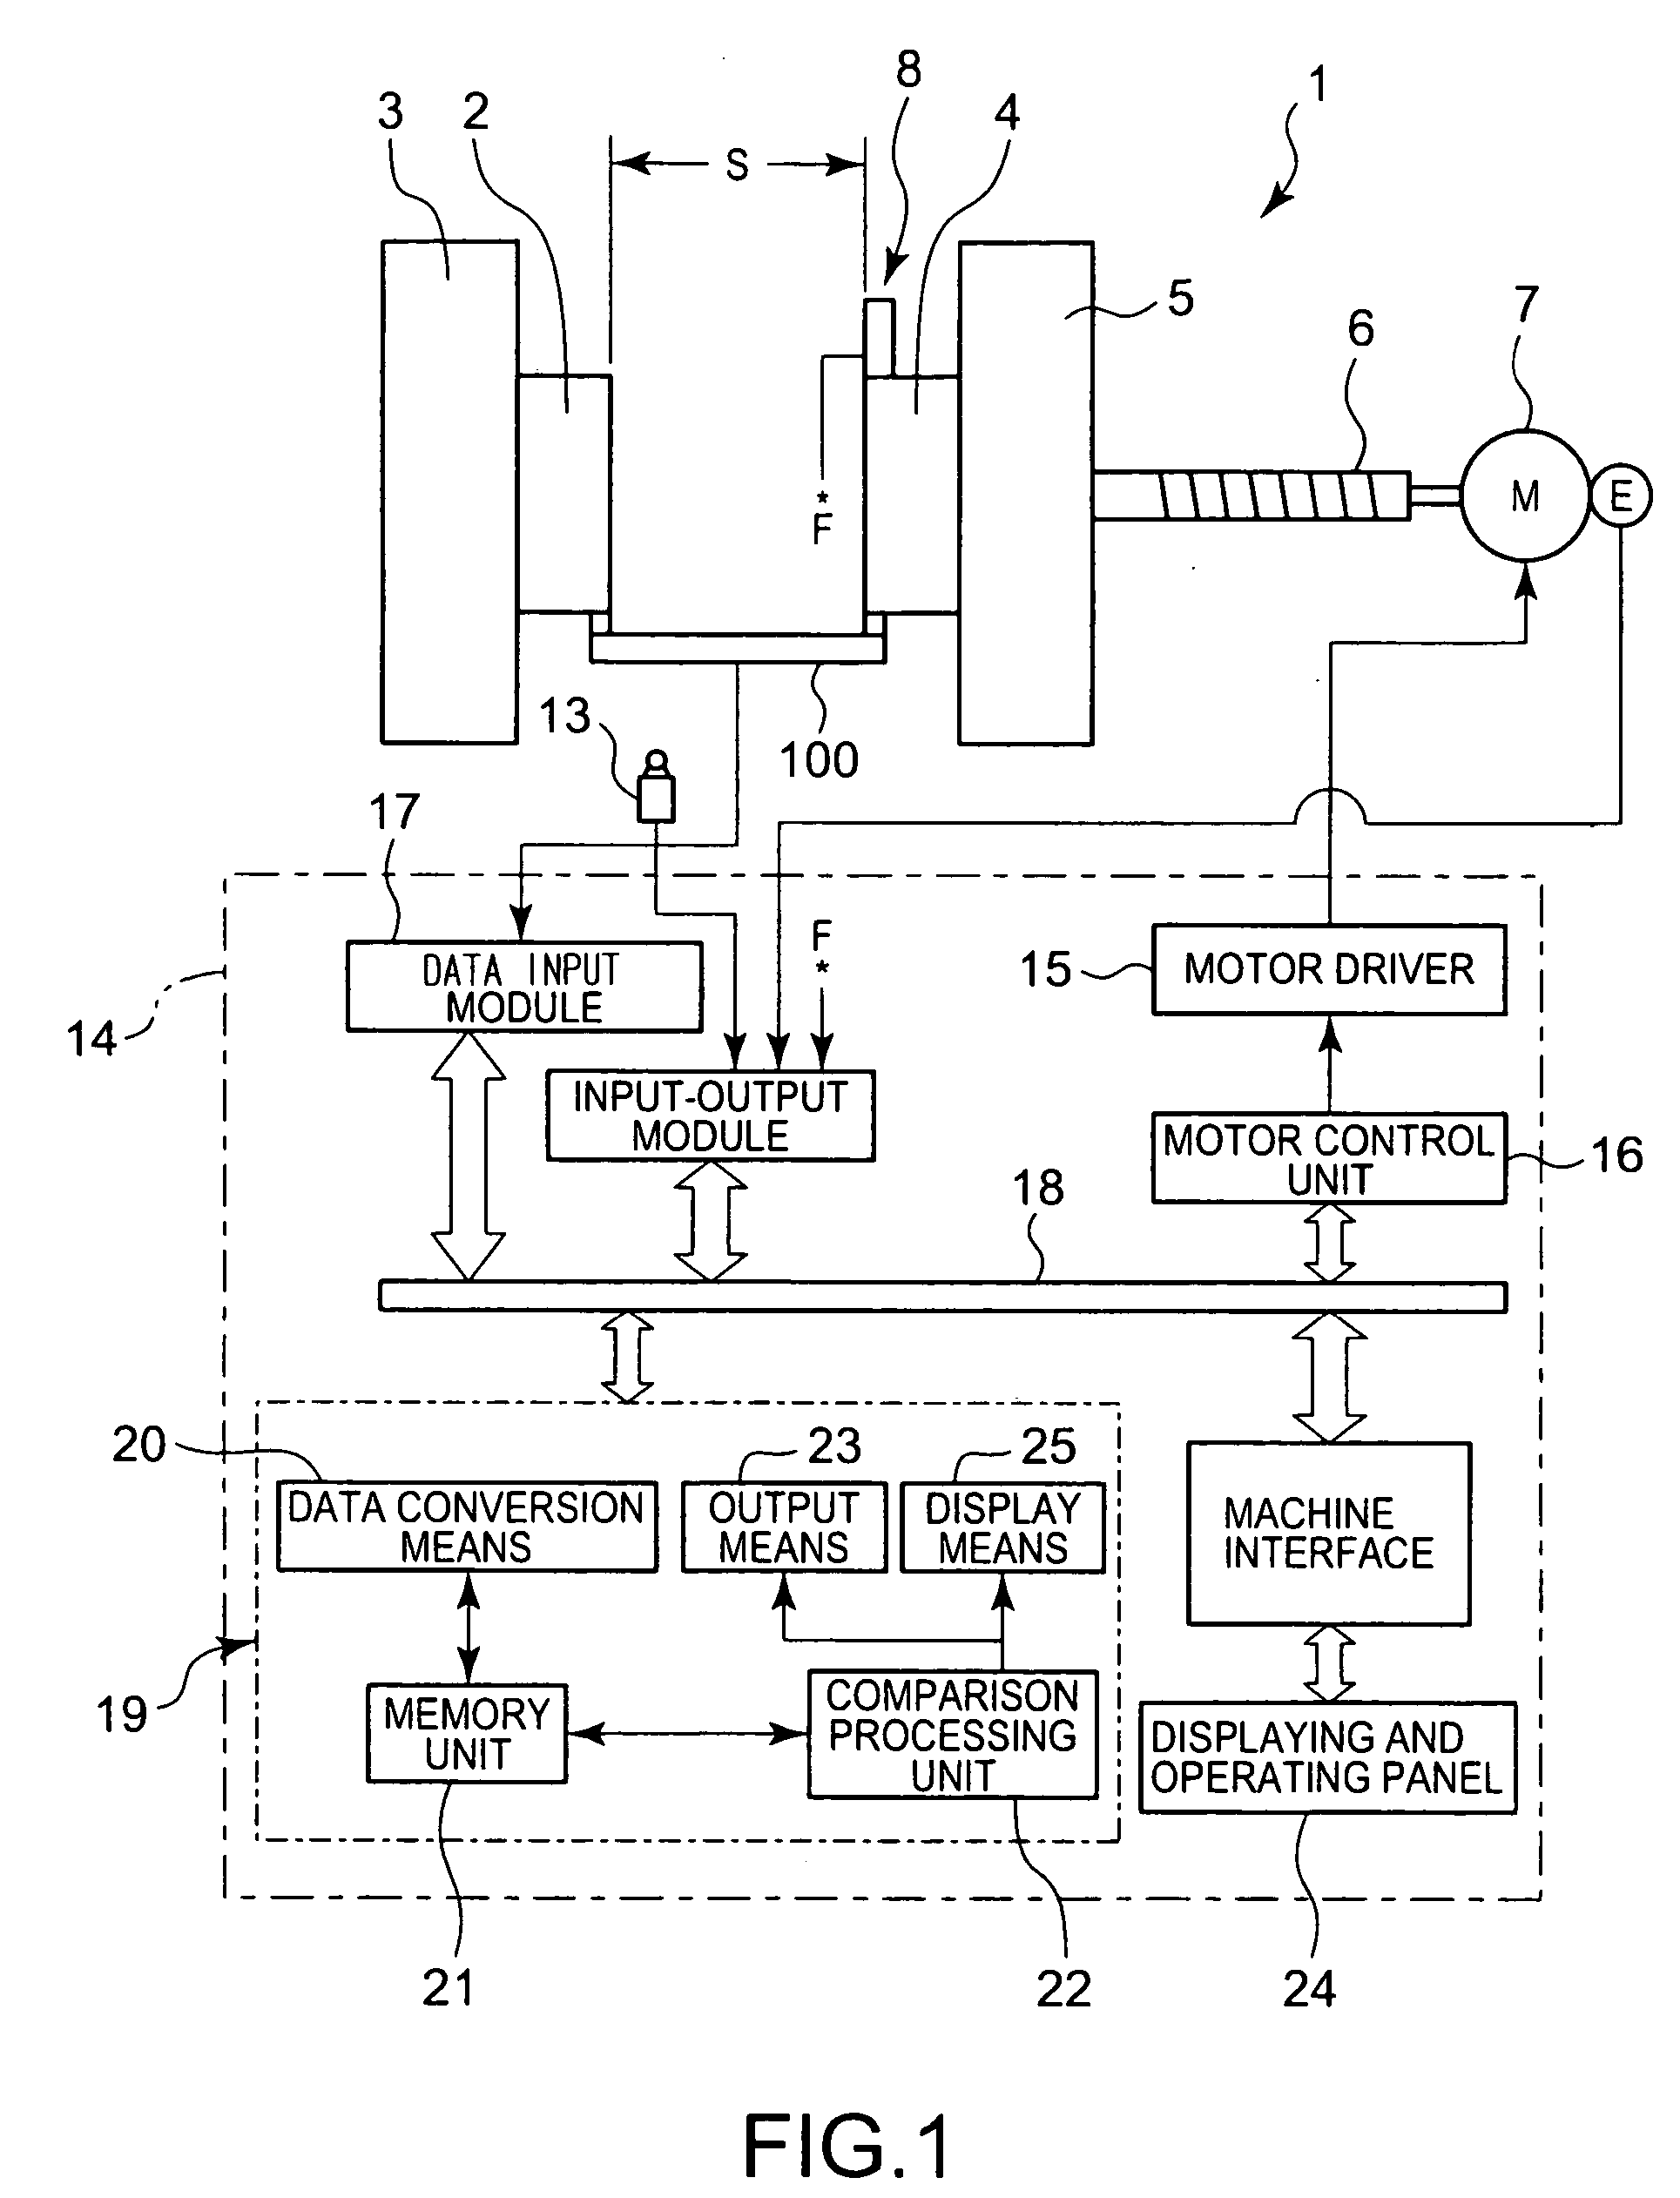 Method and apparatus for electric clamping